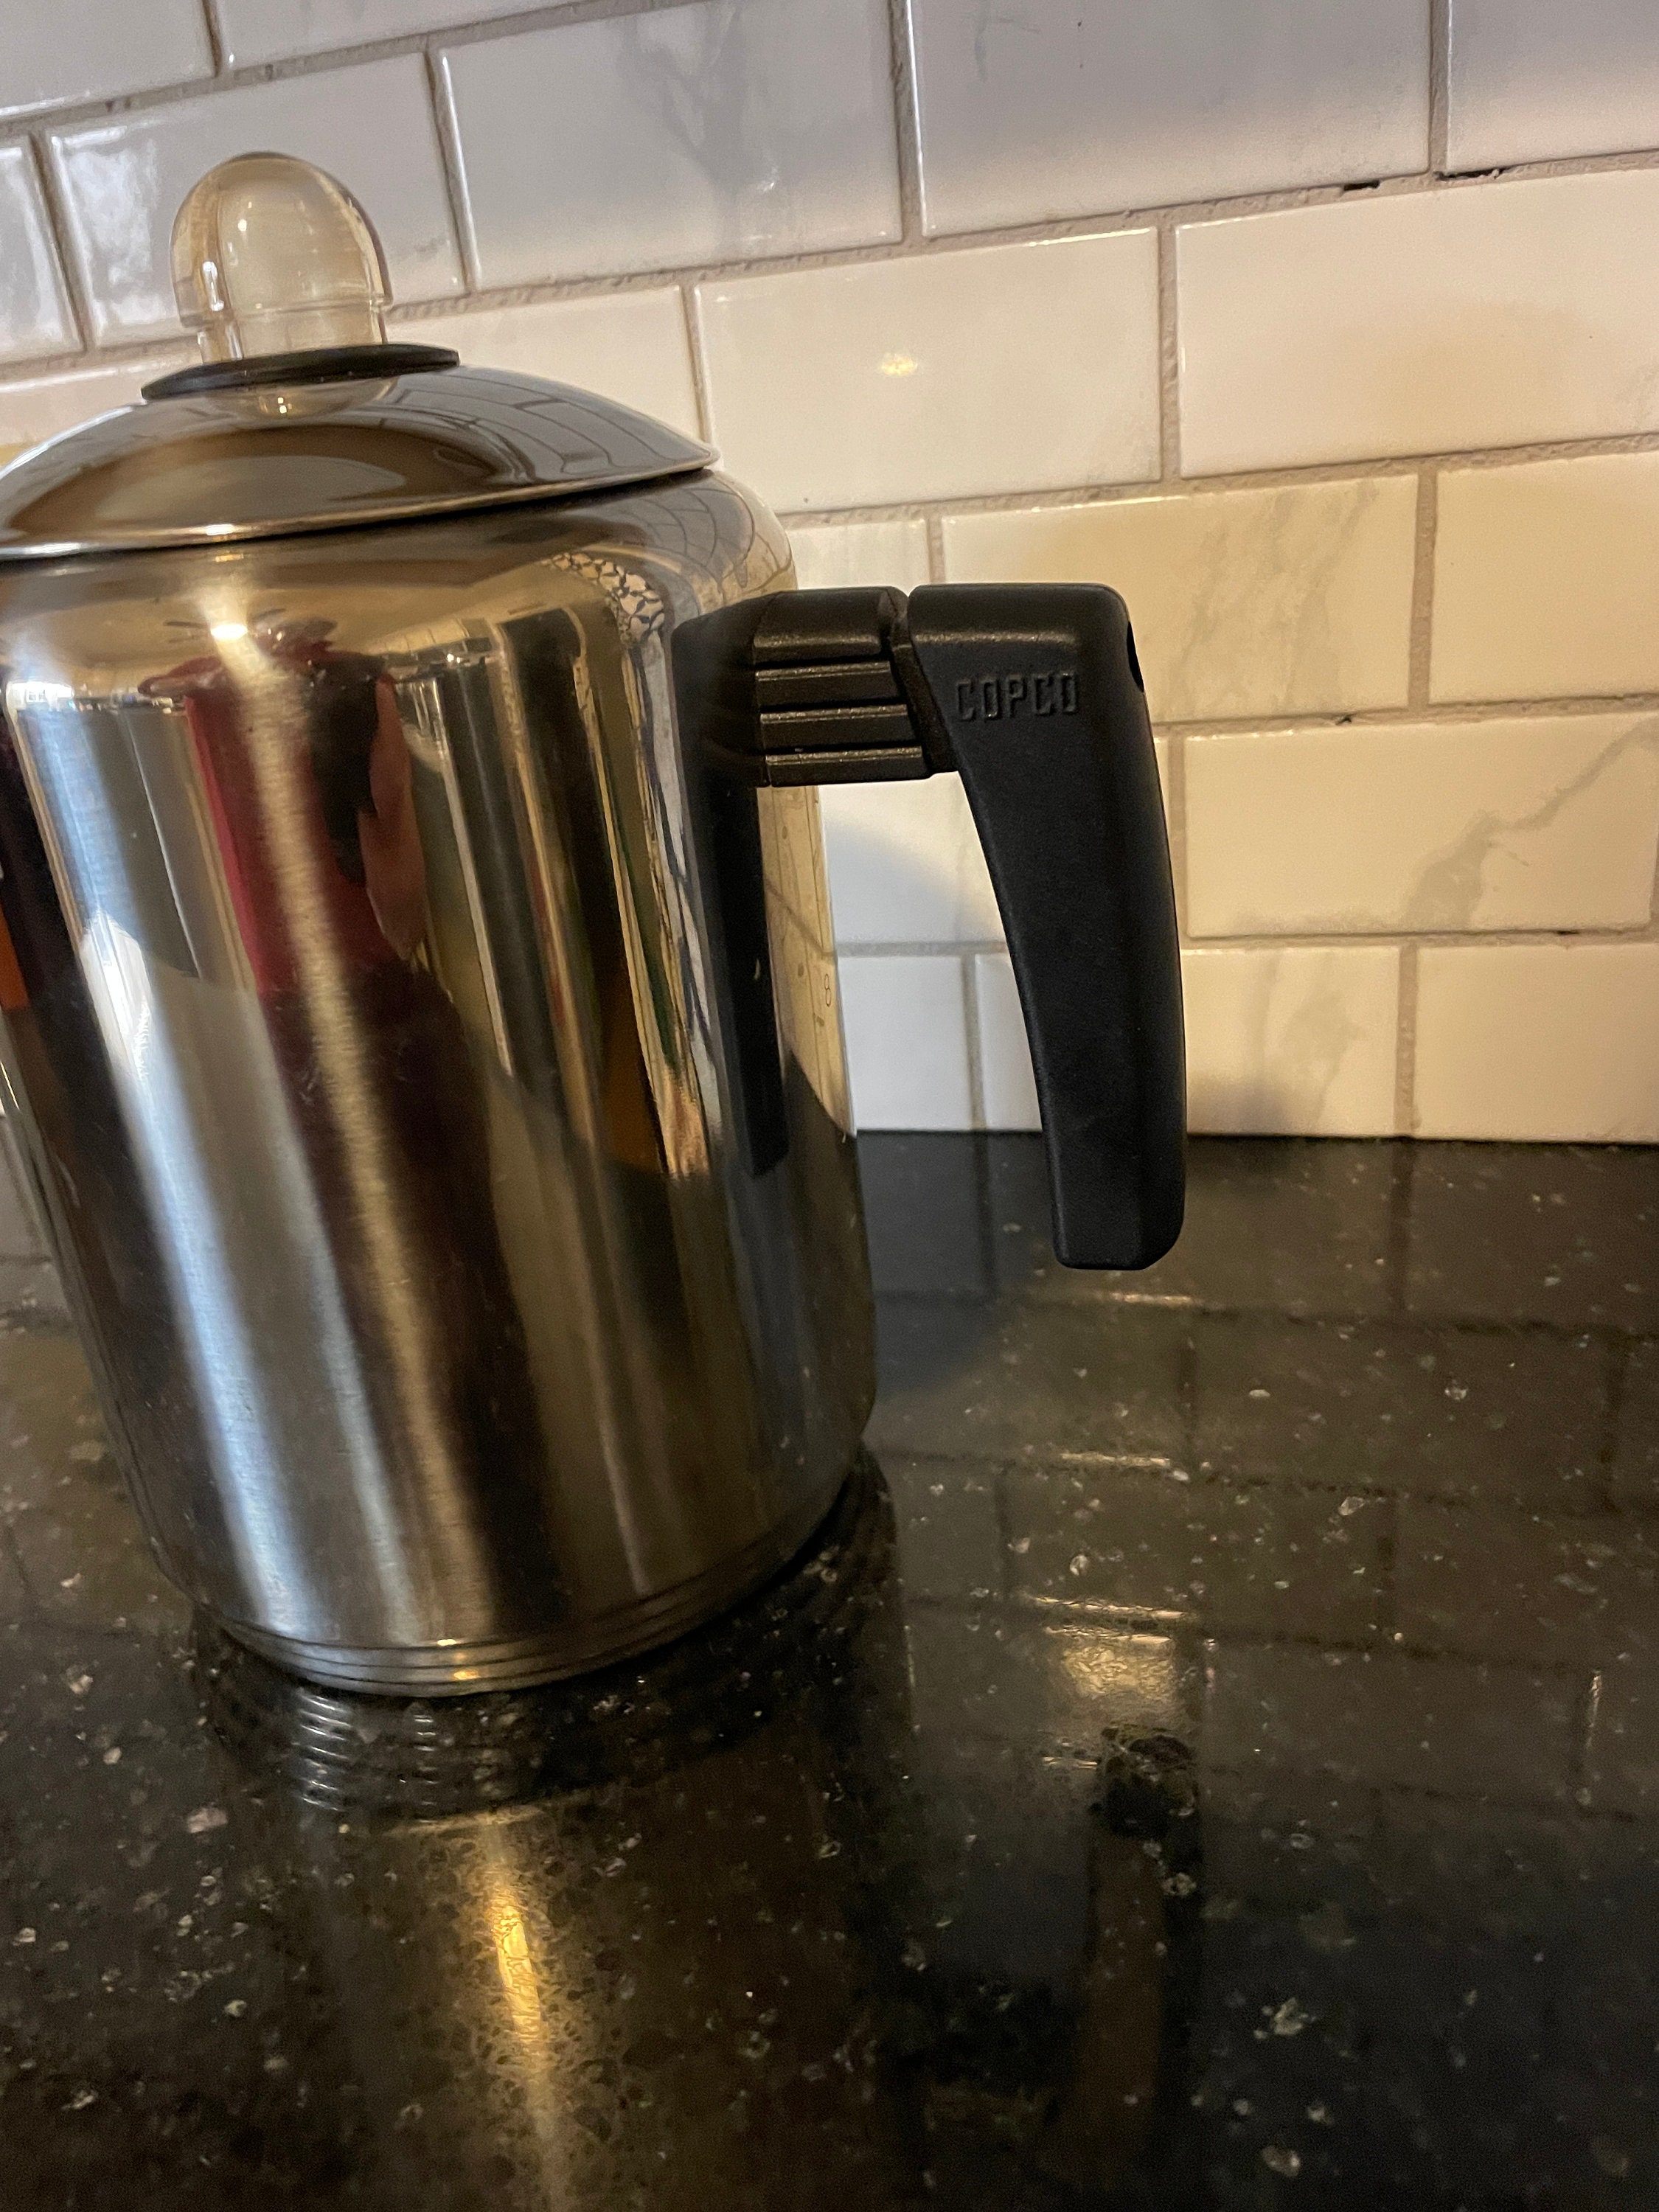 Copco Stove Top Percolator Coffee Pot 8 Cup Stainless Steel Mid